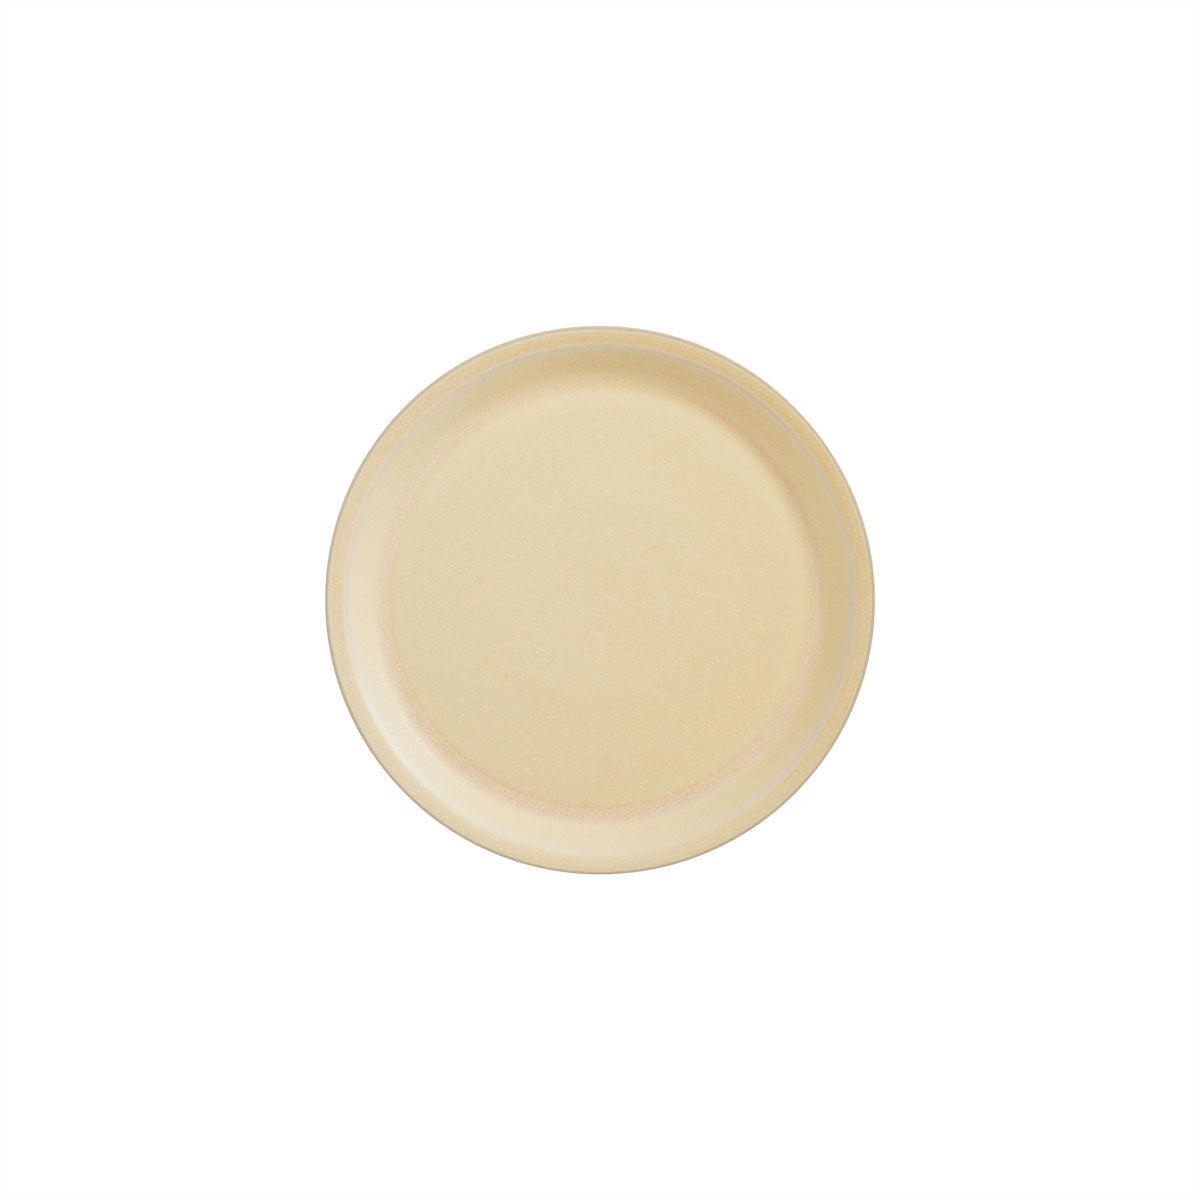 OYOY LIVING Yuka Lunch Plate - Pack of 2 Dining Ware